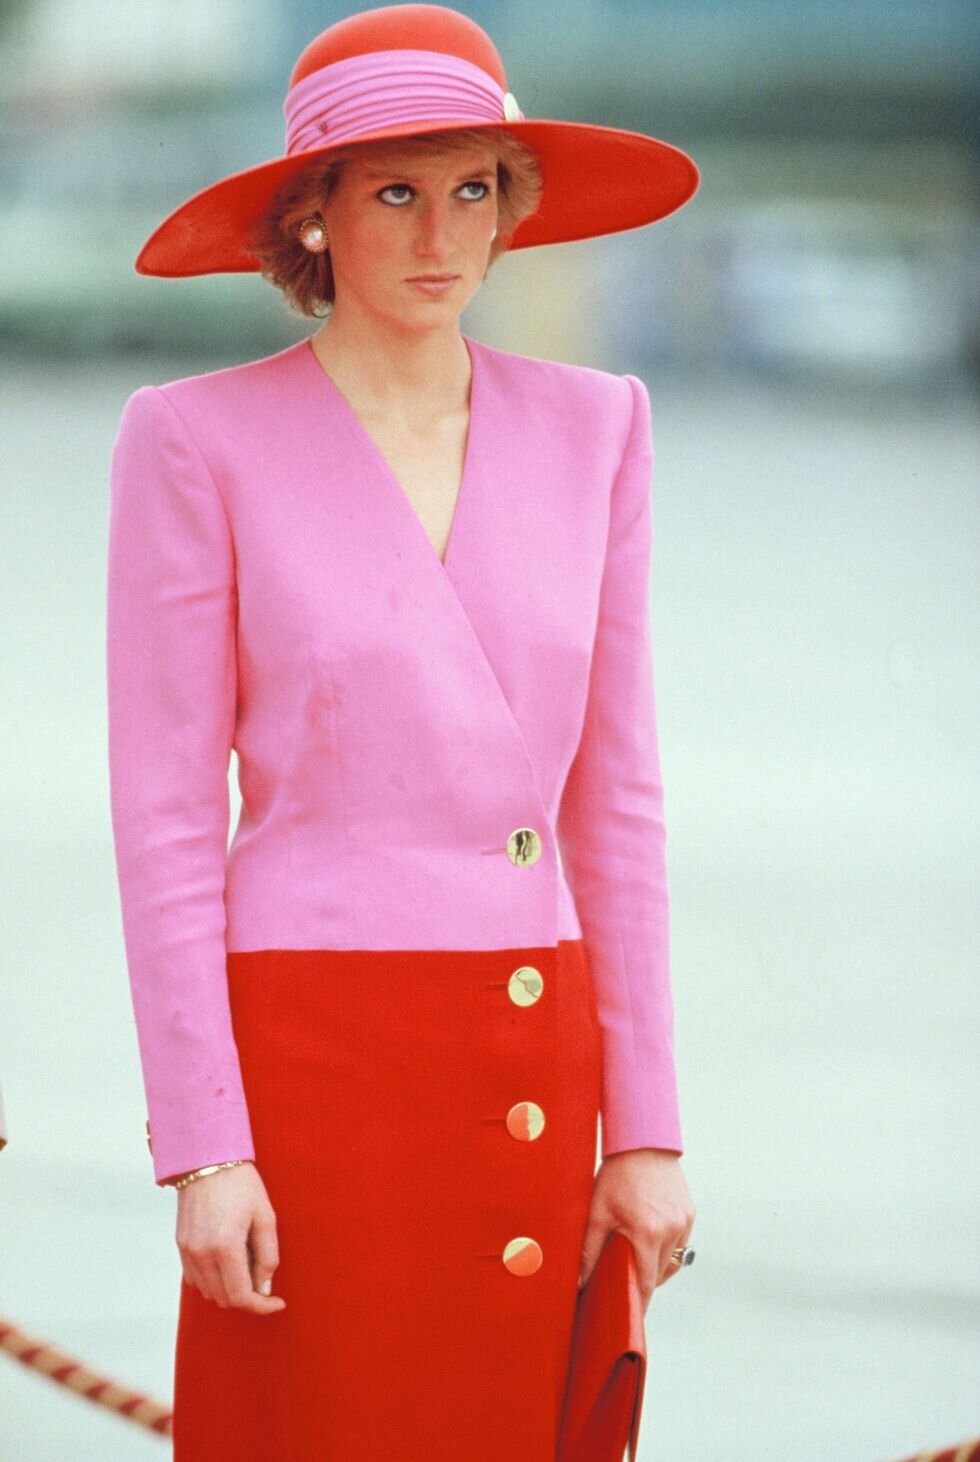 diana-princess-of-wales-wears-a-catherine-walker-suit-and-a-news-photo-180977627-1554318348.jpg